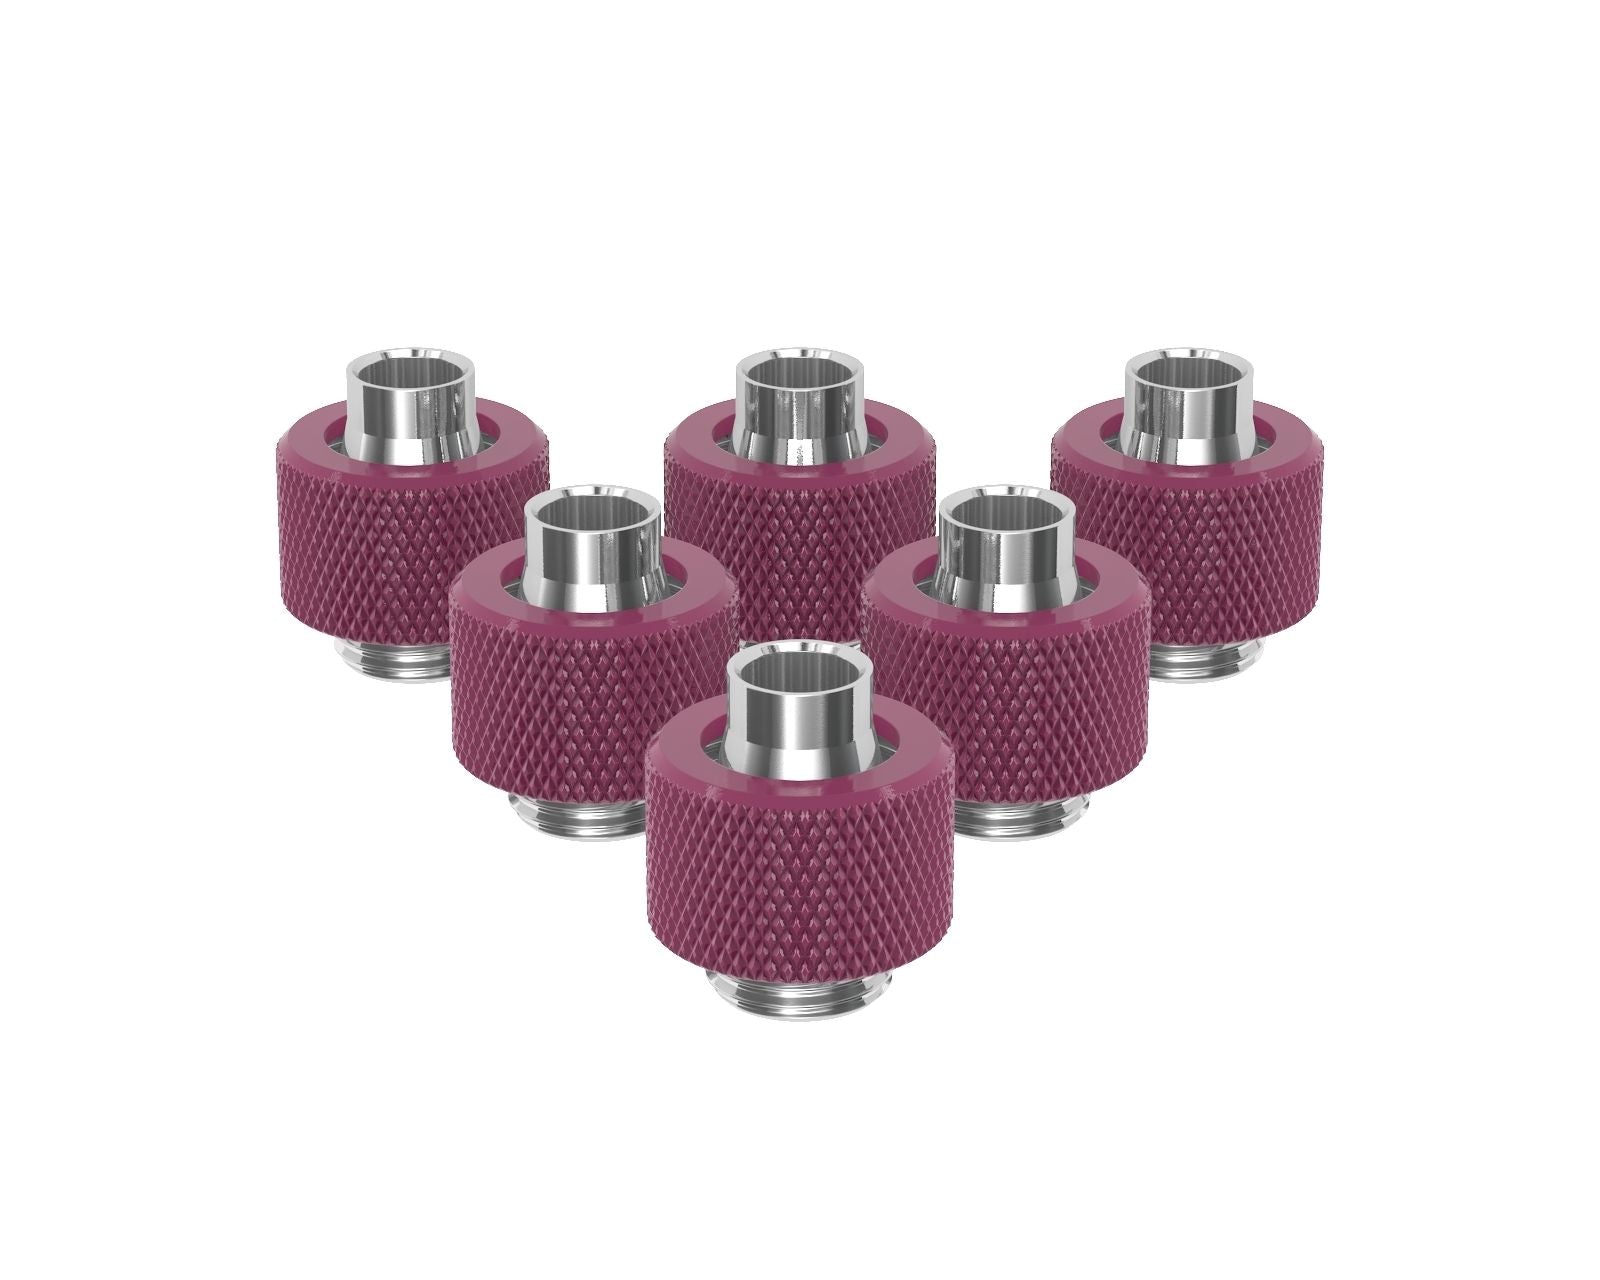 PrimoChill SecureFit SX - Premium Compression Fitting For 3/8in ID x 1/2in OD Flexible Tubing 6 Pack (F-SFSX12-6) - Available in 20+ Colors, Custom Watercooling Loop Ready - Magenta